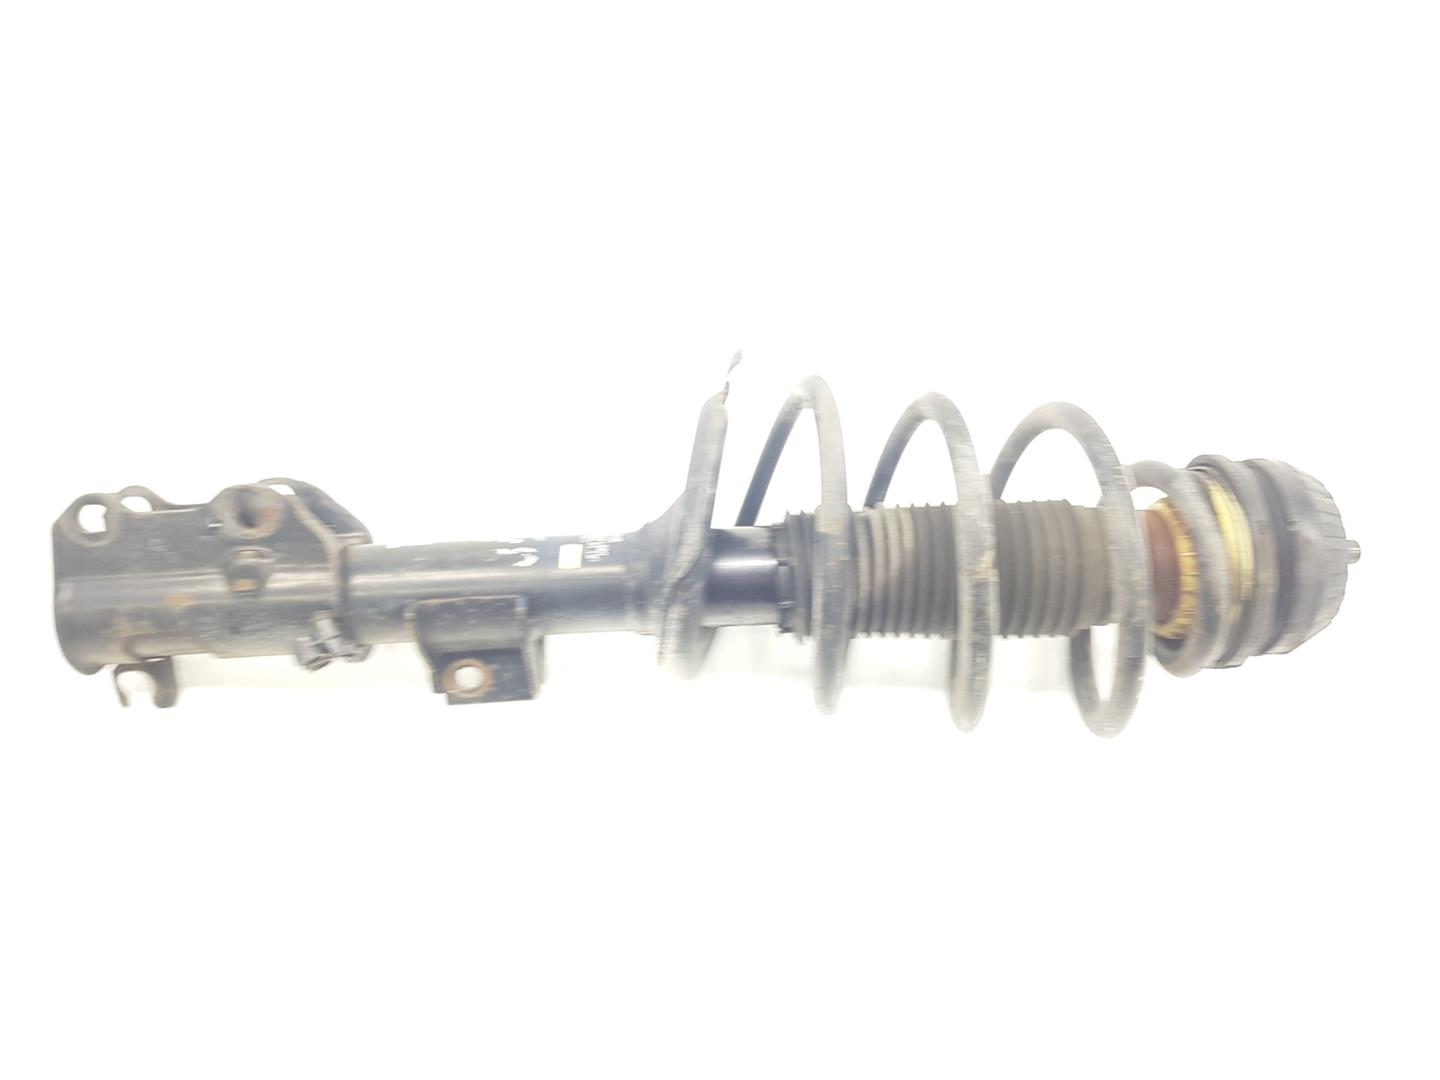 MERCEDES-BENZ Vito W639 (2003-2015) Front Left Shock Absorber A6393202113, A6393203613 23501699